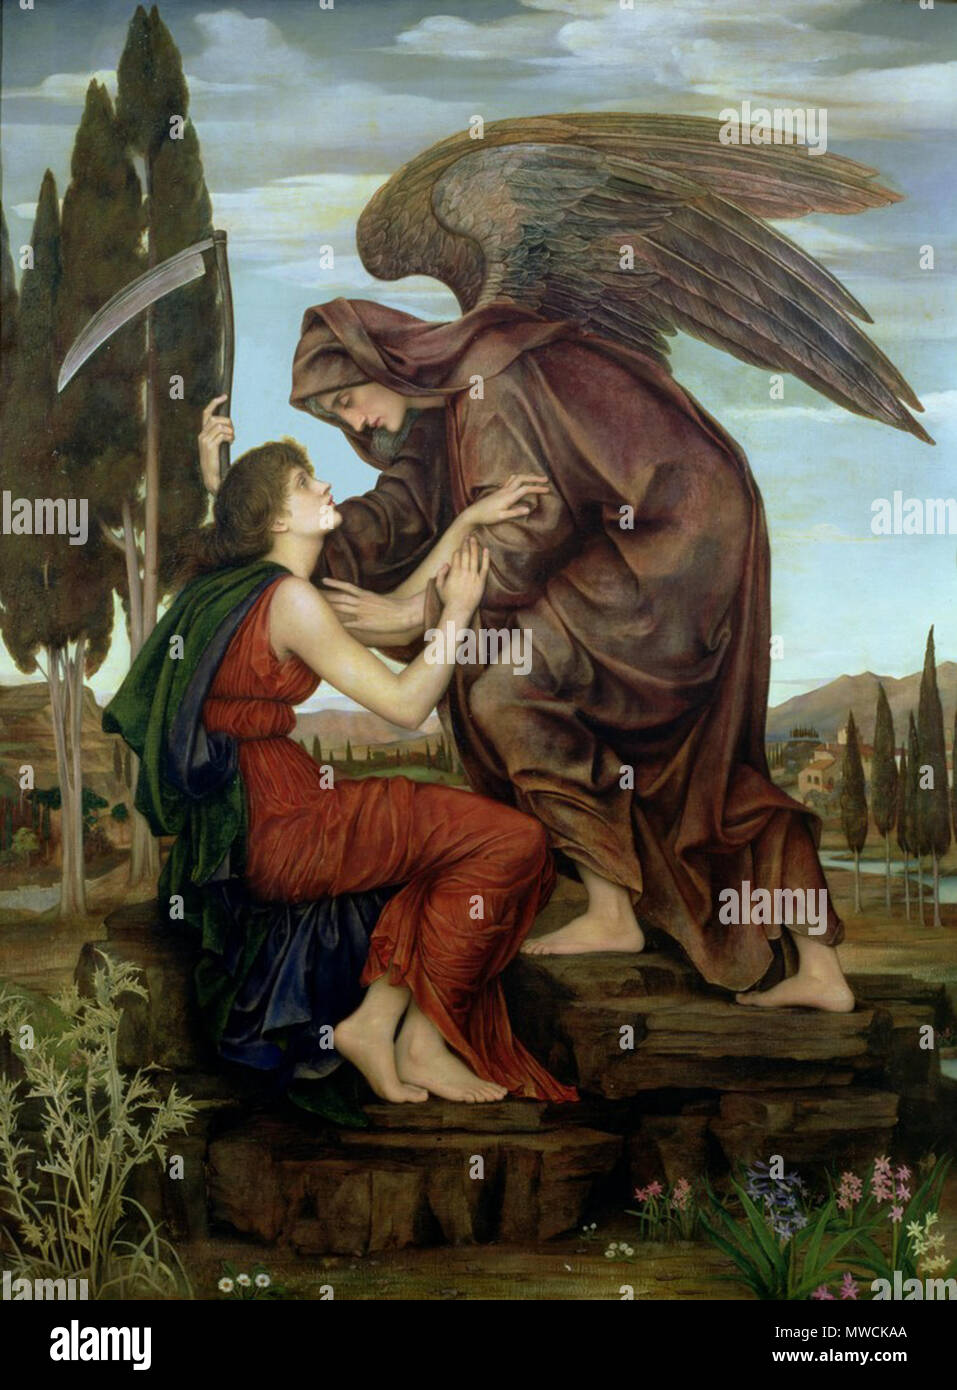 .  English: An artistic depiction of the angel of death. Painted in 1881 by Evelyn De Morgan, née Pickering (1855-1919). Source: http://wendydenise13.tripod.com/fineart1/morgan-angelofdeath.jpg (found inactive 2006-10-27) Alternate source: http://www.elp.it/bygothic/immagini/arte/demorgan/15.jpeg (accessed 2006-10-27) . 1881  199 Evelyn De Morgan - Angel of Death Stock Photo